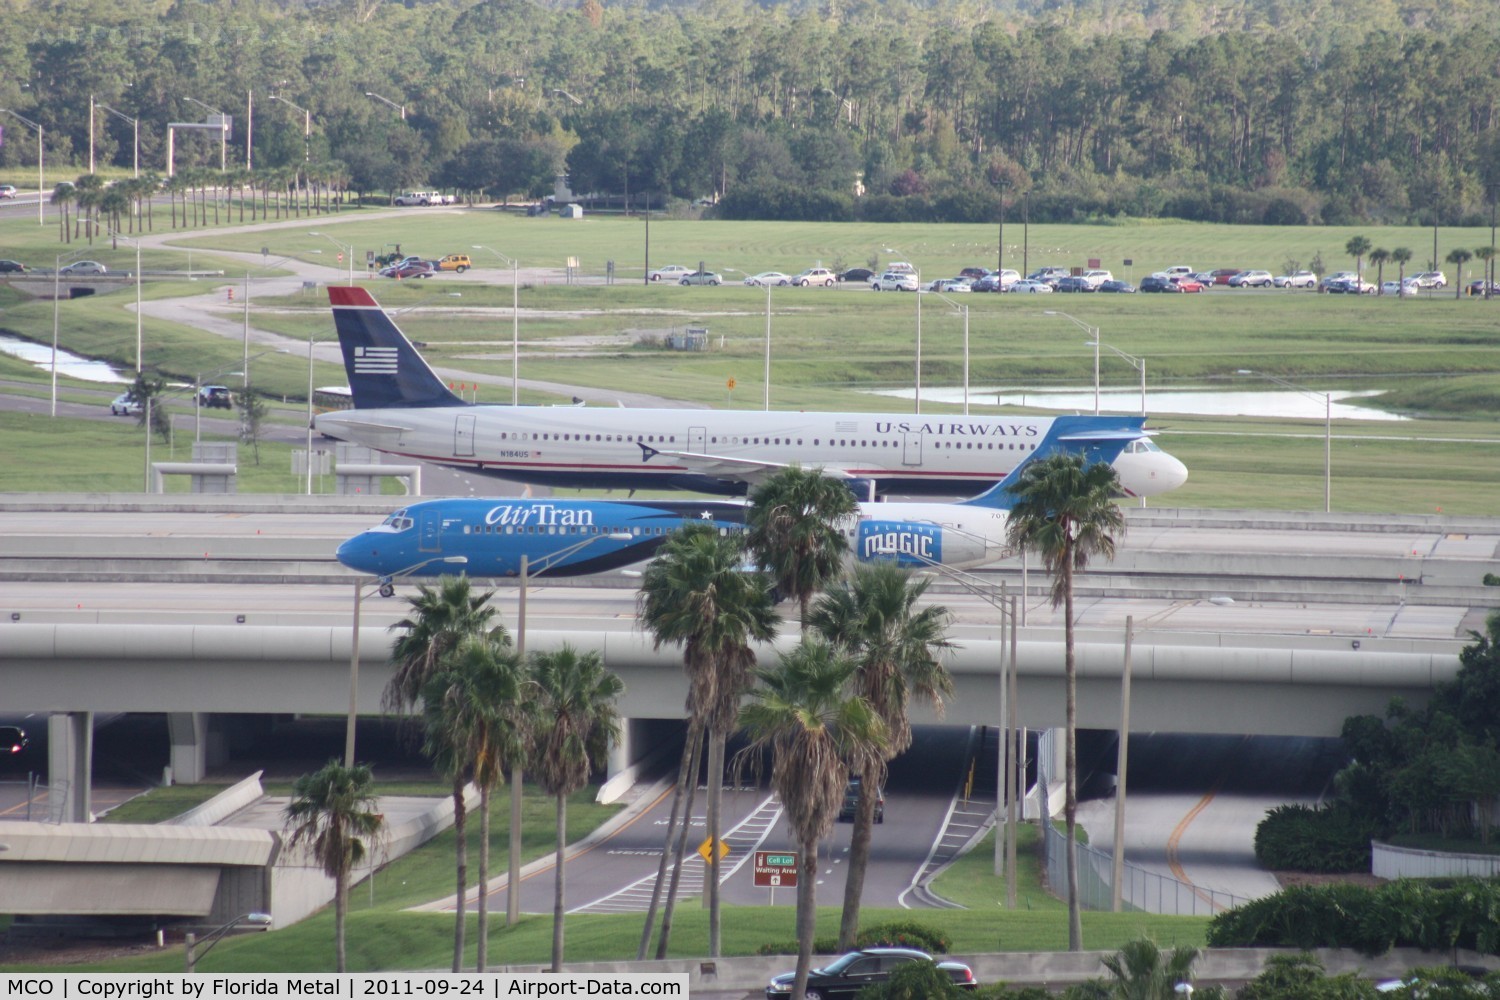 Orlando International Airport (MCO) - Taxiway bridges over South Access Rd